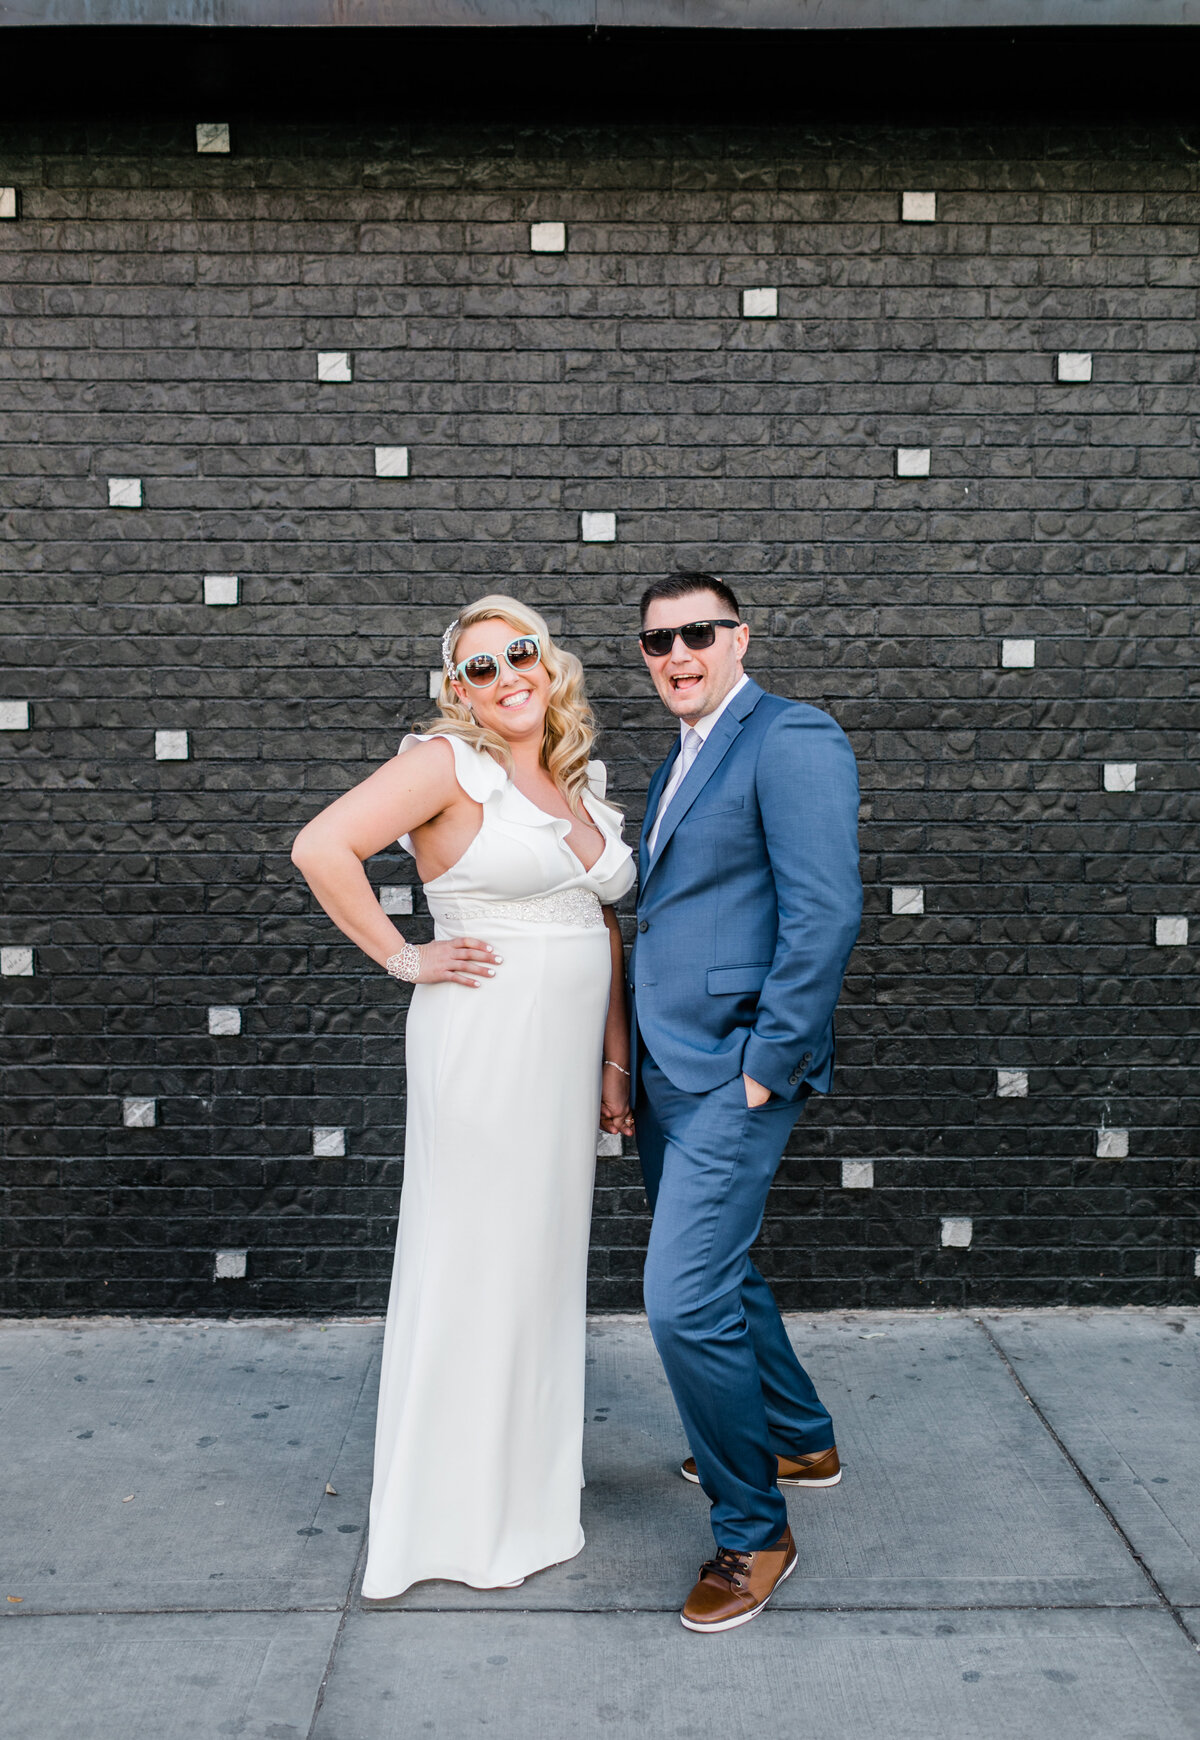 2020.2.15 - Little White Wedding Chapel and Fremont - Brianne & Andy's Elopement - Ivette West Photography-52